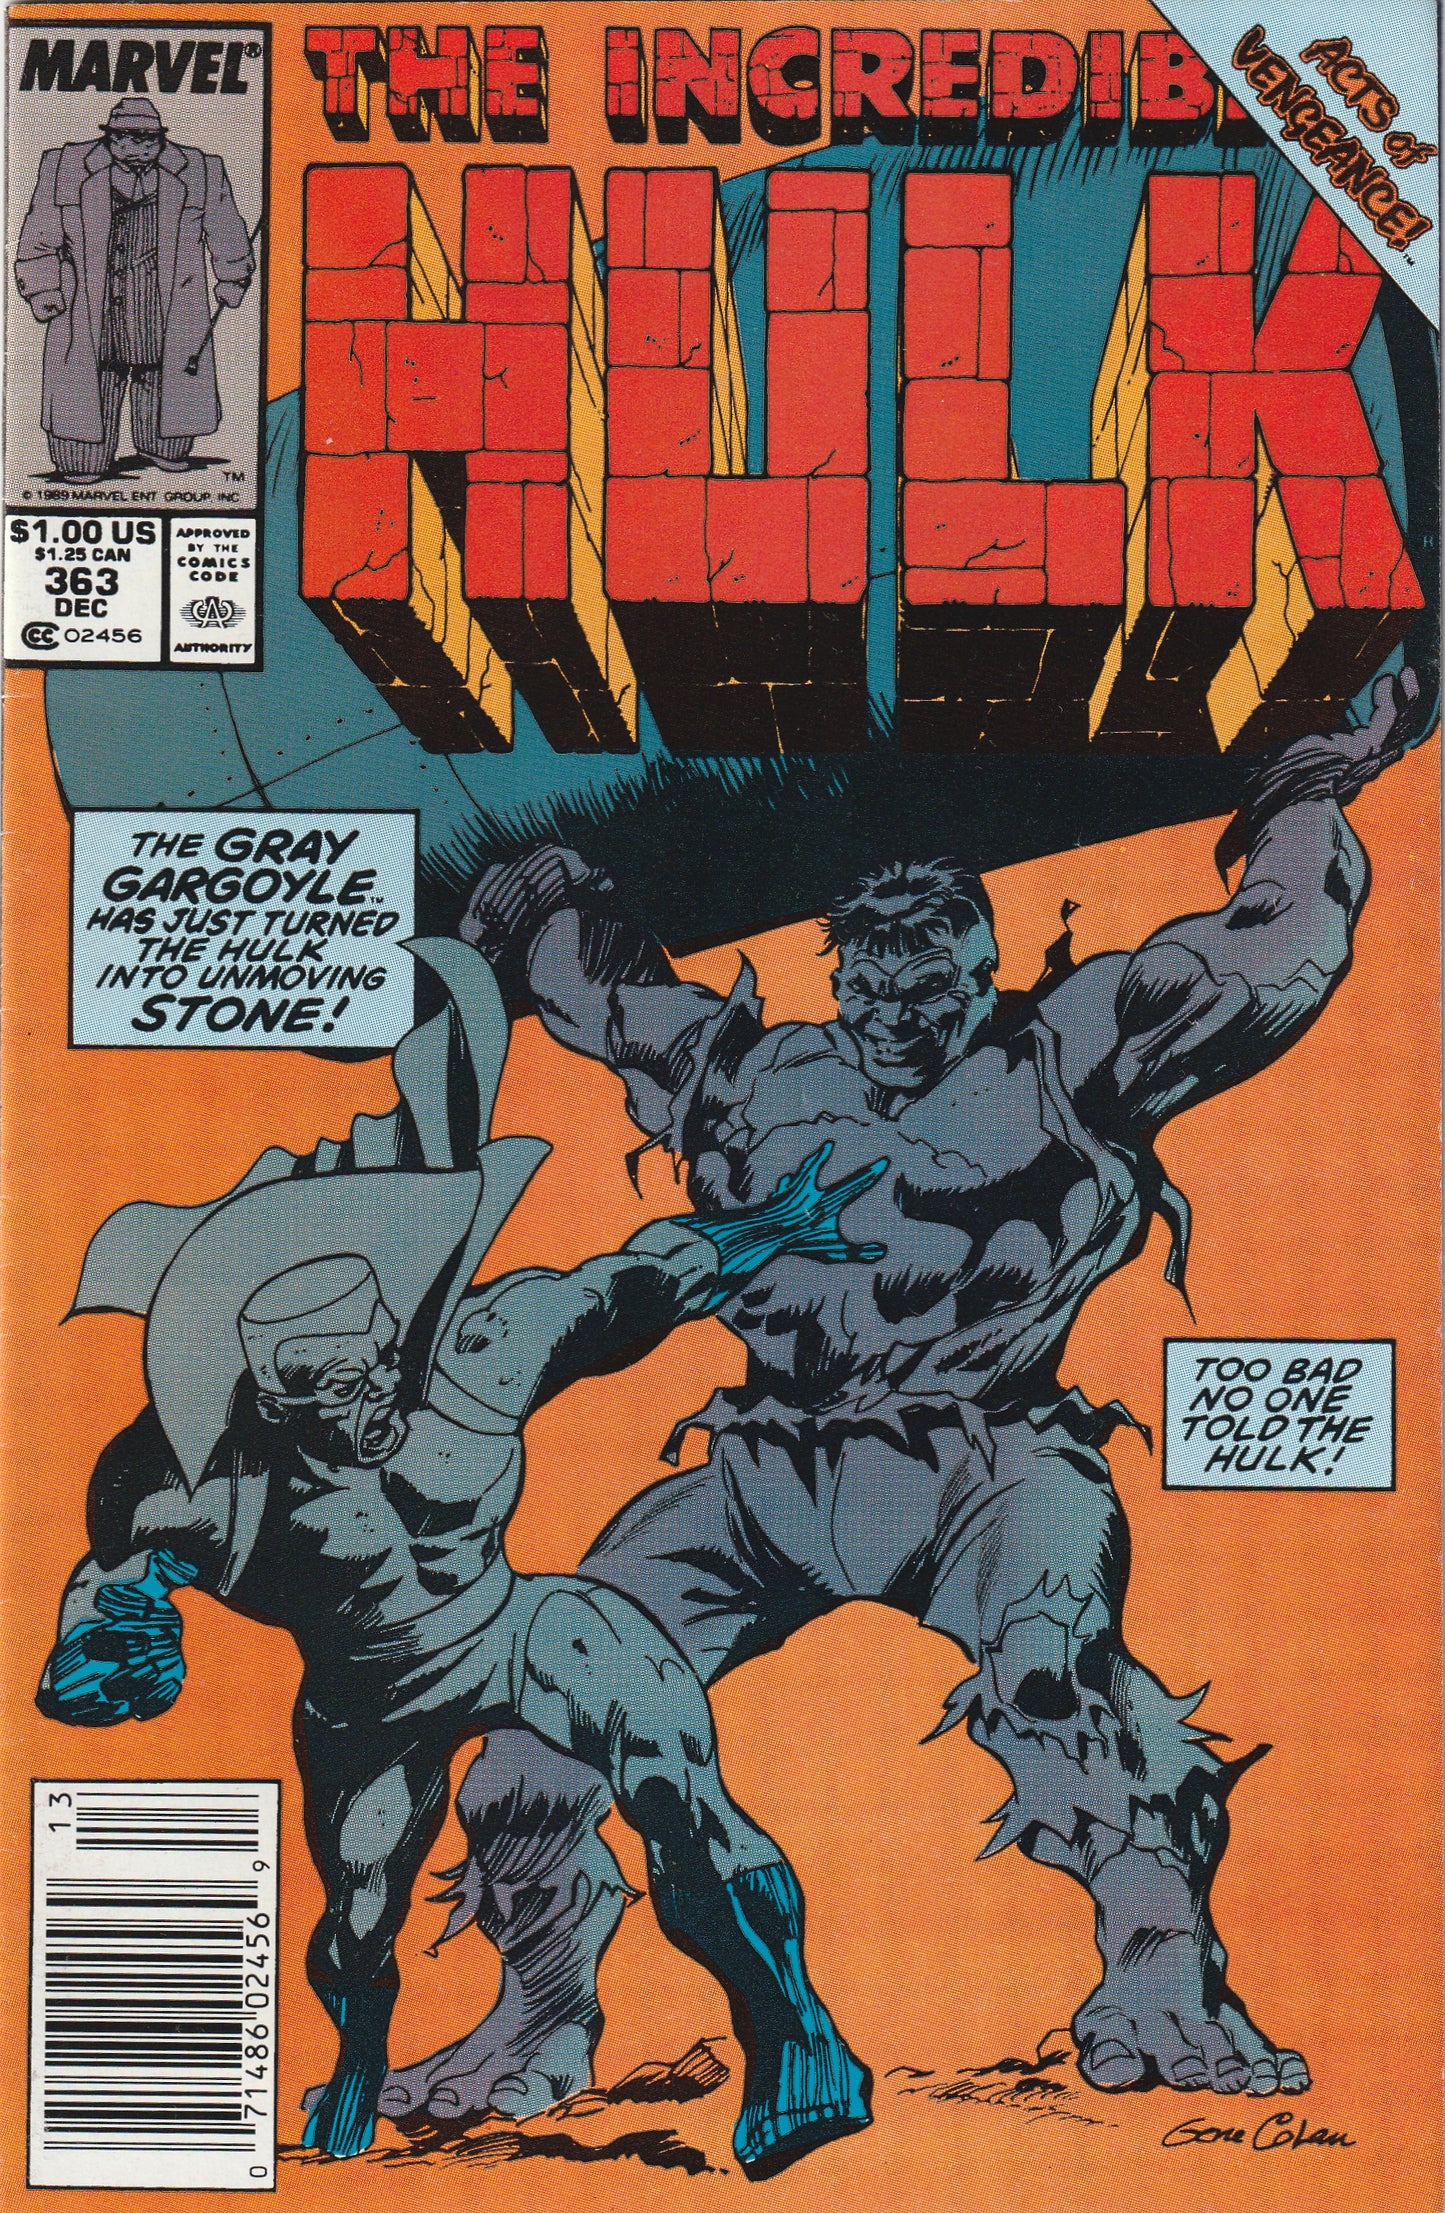 Incredible Hulk #363 (1989) - Acts of Vengeance tie-in